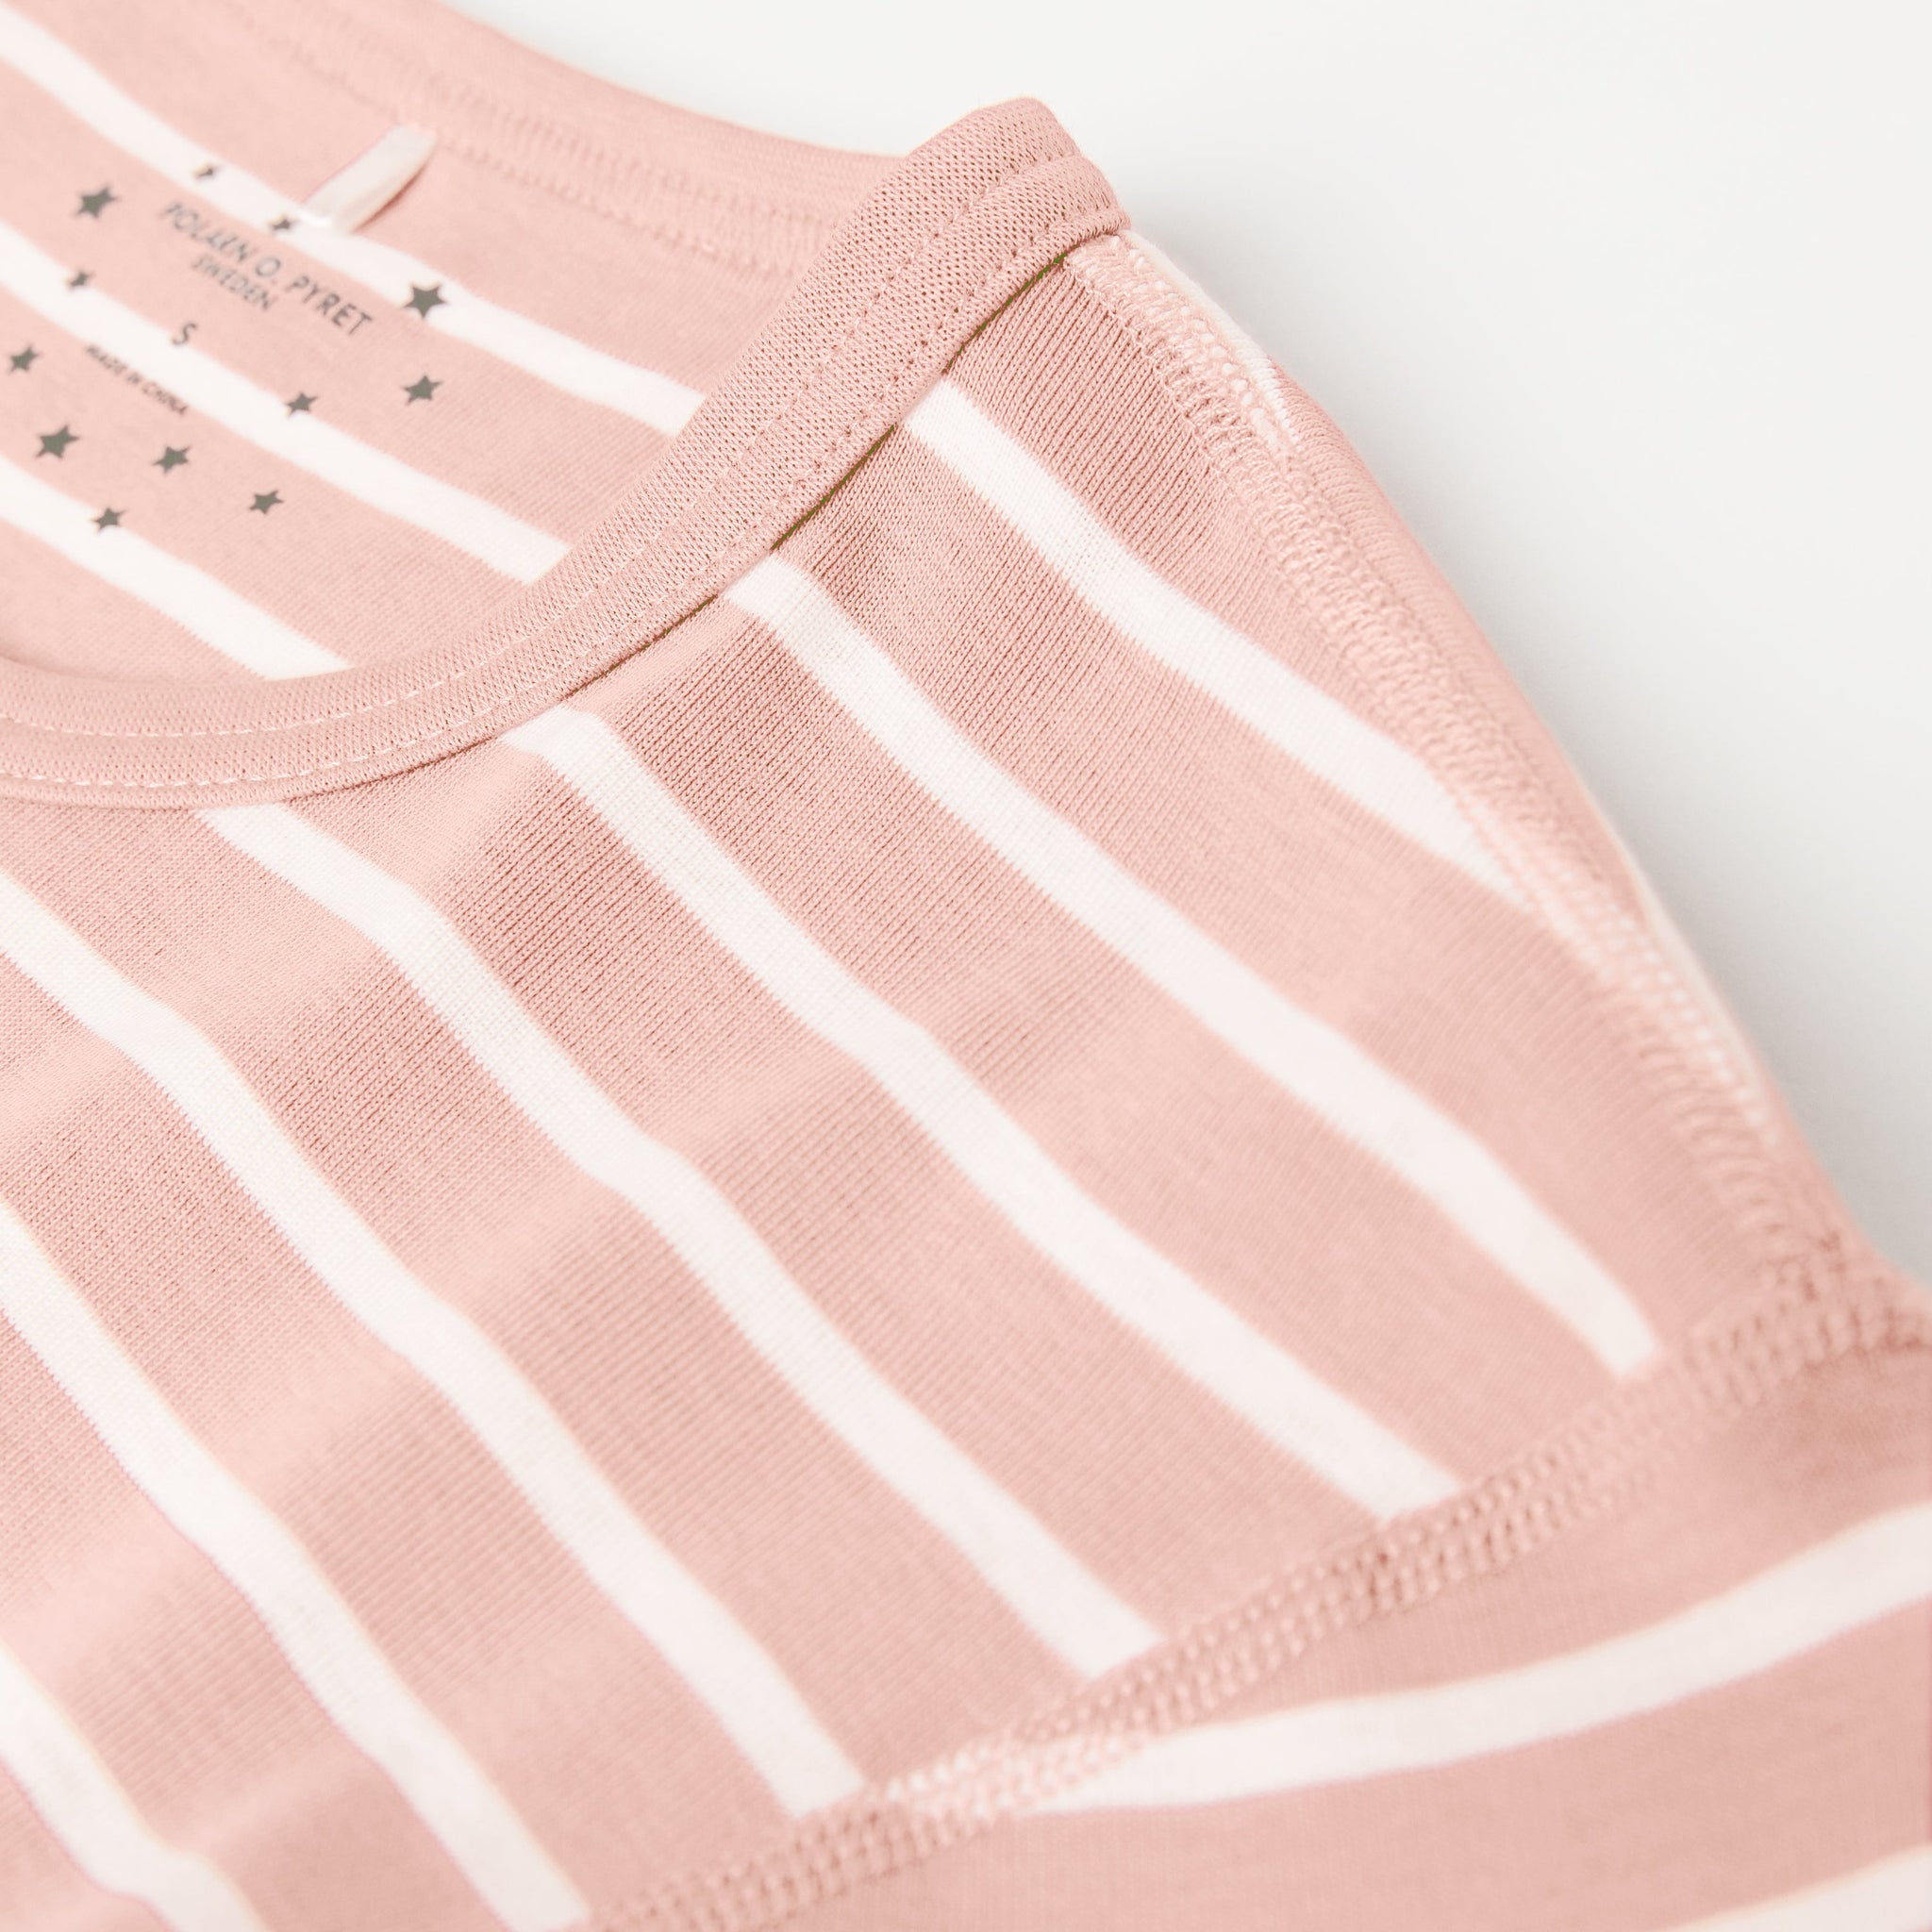 Striped Pink Adult Pyjamas from the Polarn O. Pyret adult collection. Ethically produced adult pyjamas